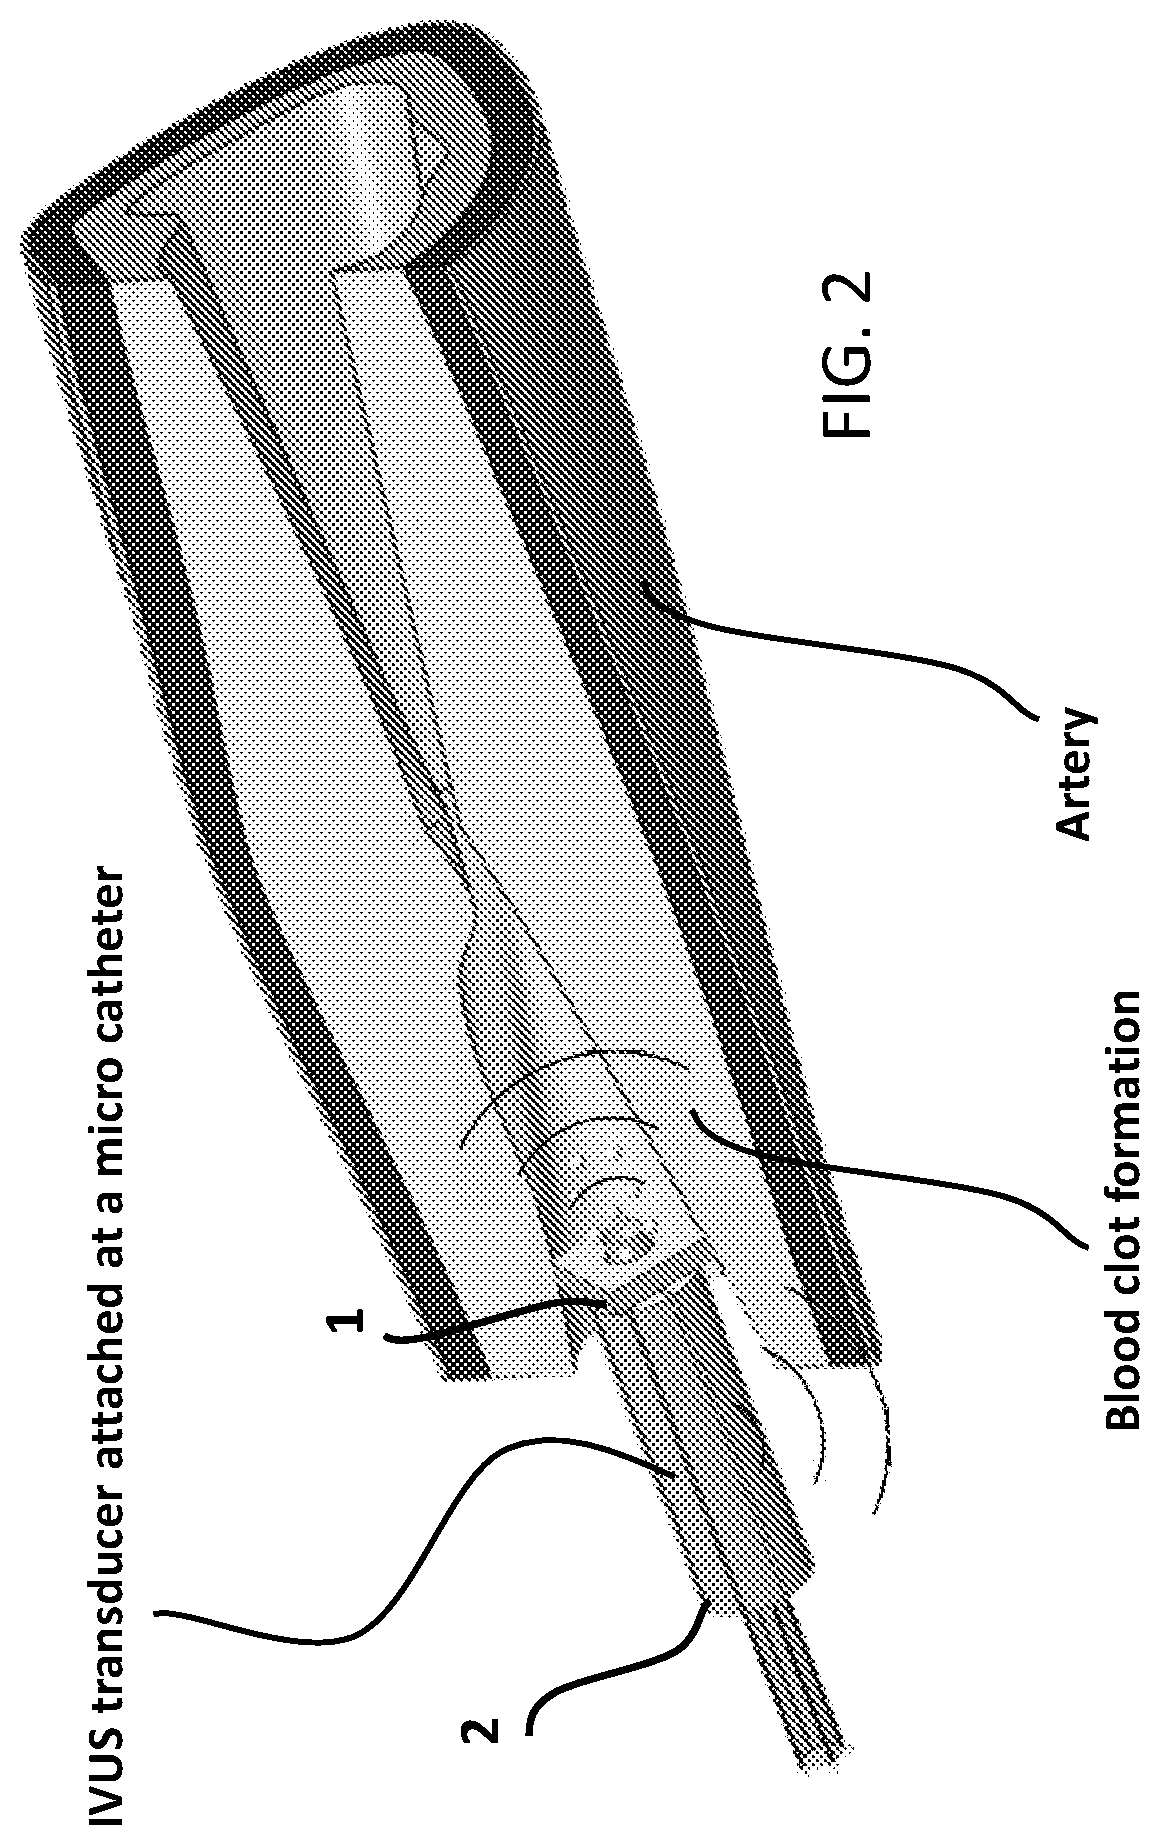 Ultrasound transducer and array for intravascular thrombolysis